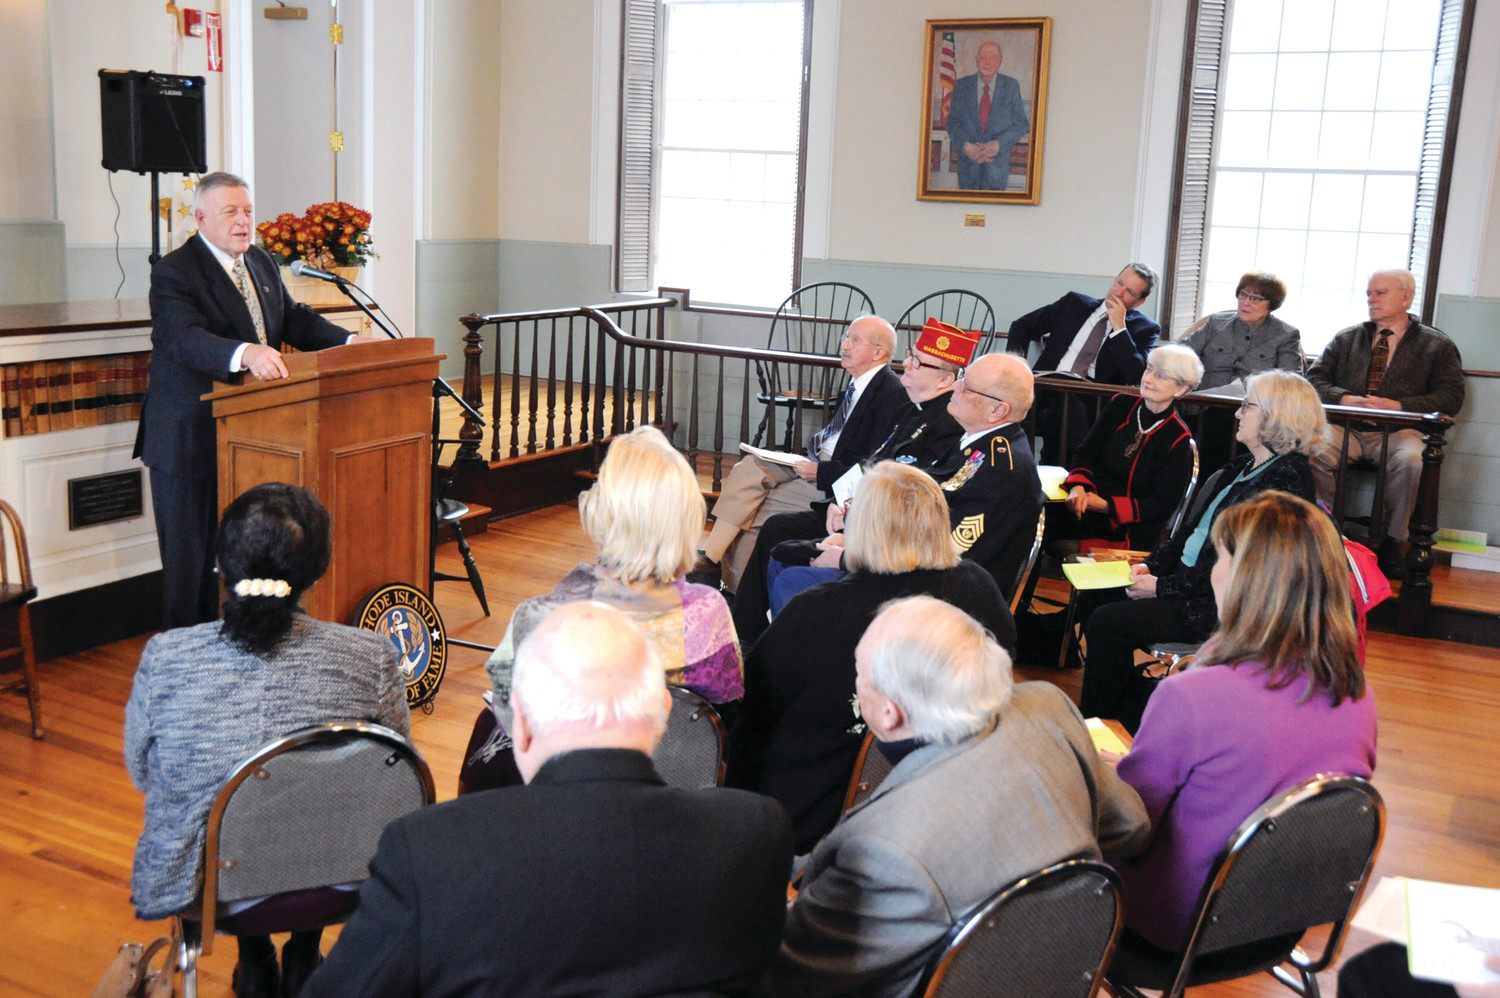 Rhode Island Historian Laureate Dr. Patrick T. Conley, chairman of the Historical Committee, leads the ceremony on Nov. 18 in which 11 historical figures, including several prominent Catholics, were inducted into the Rhode Island Heritage Hall of Fame.